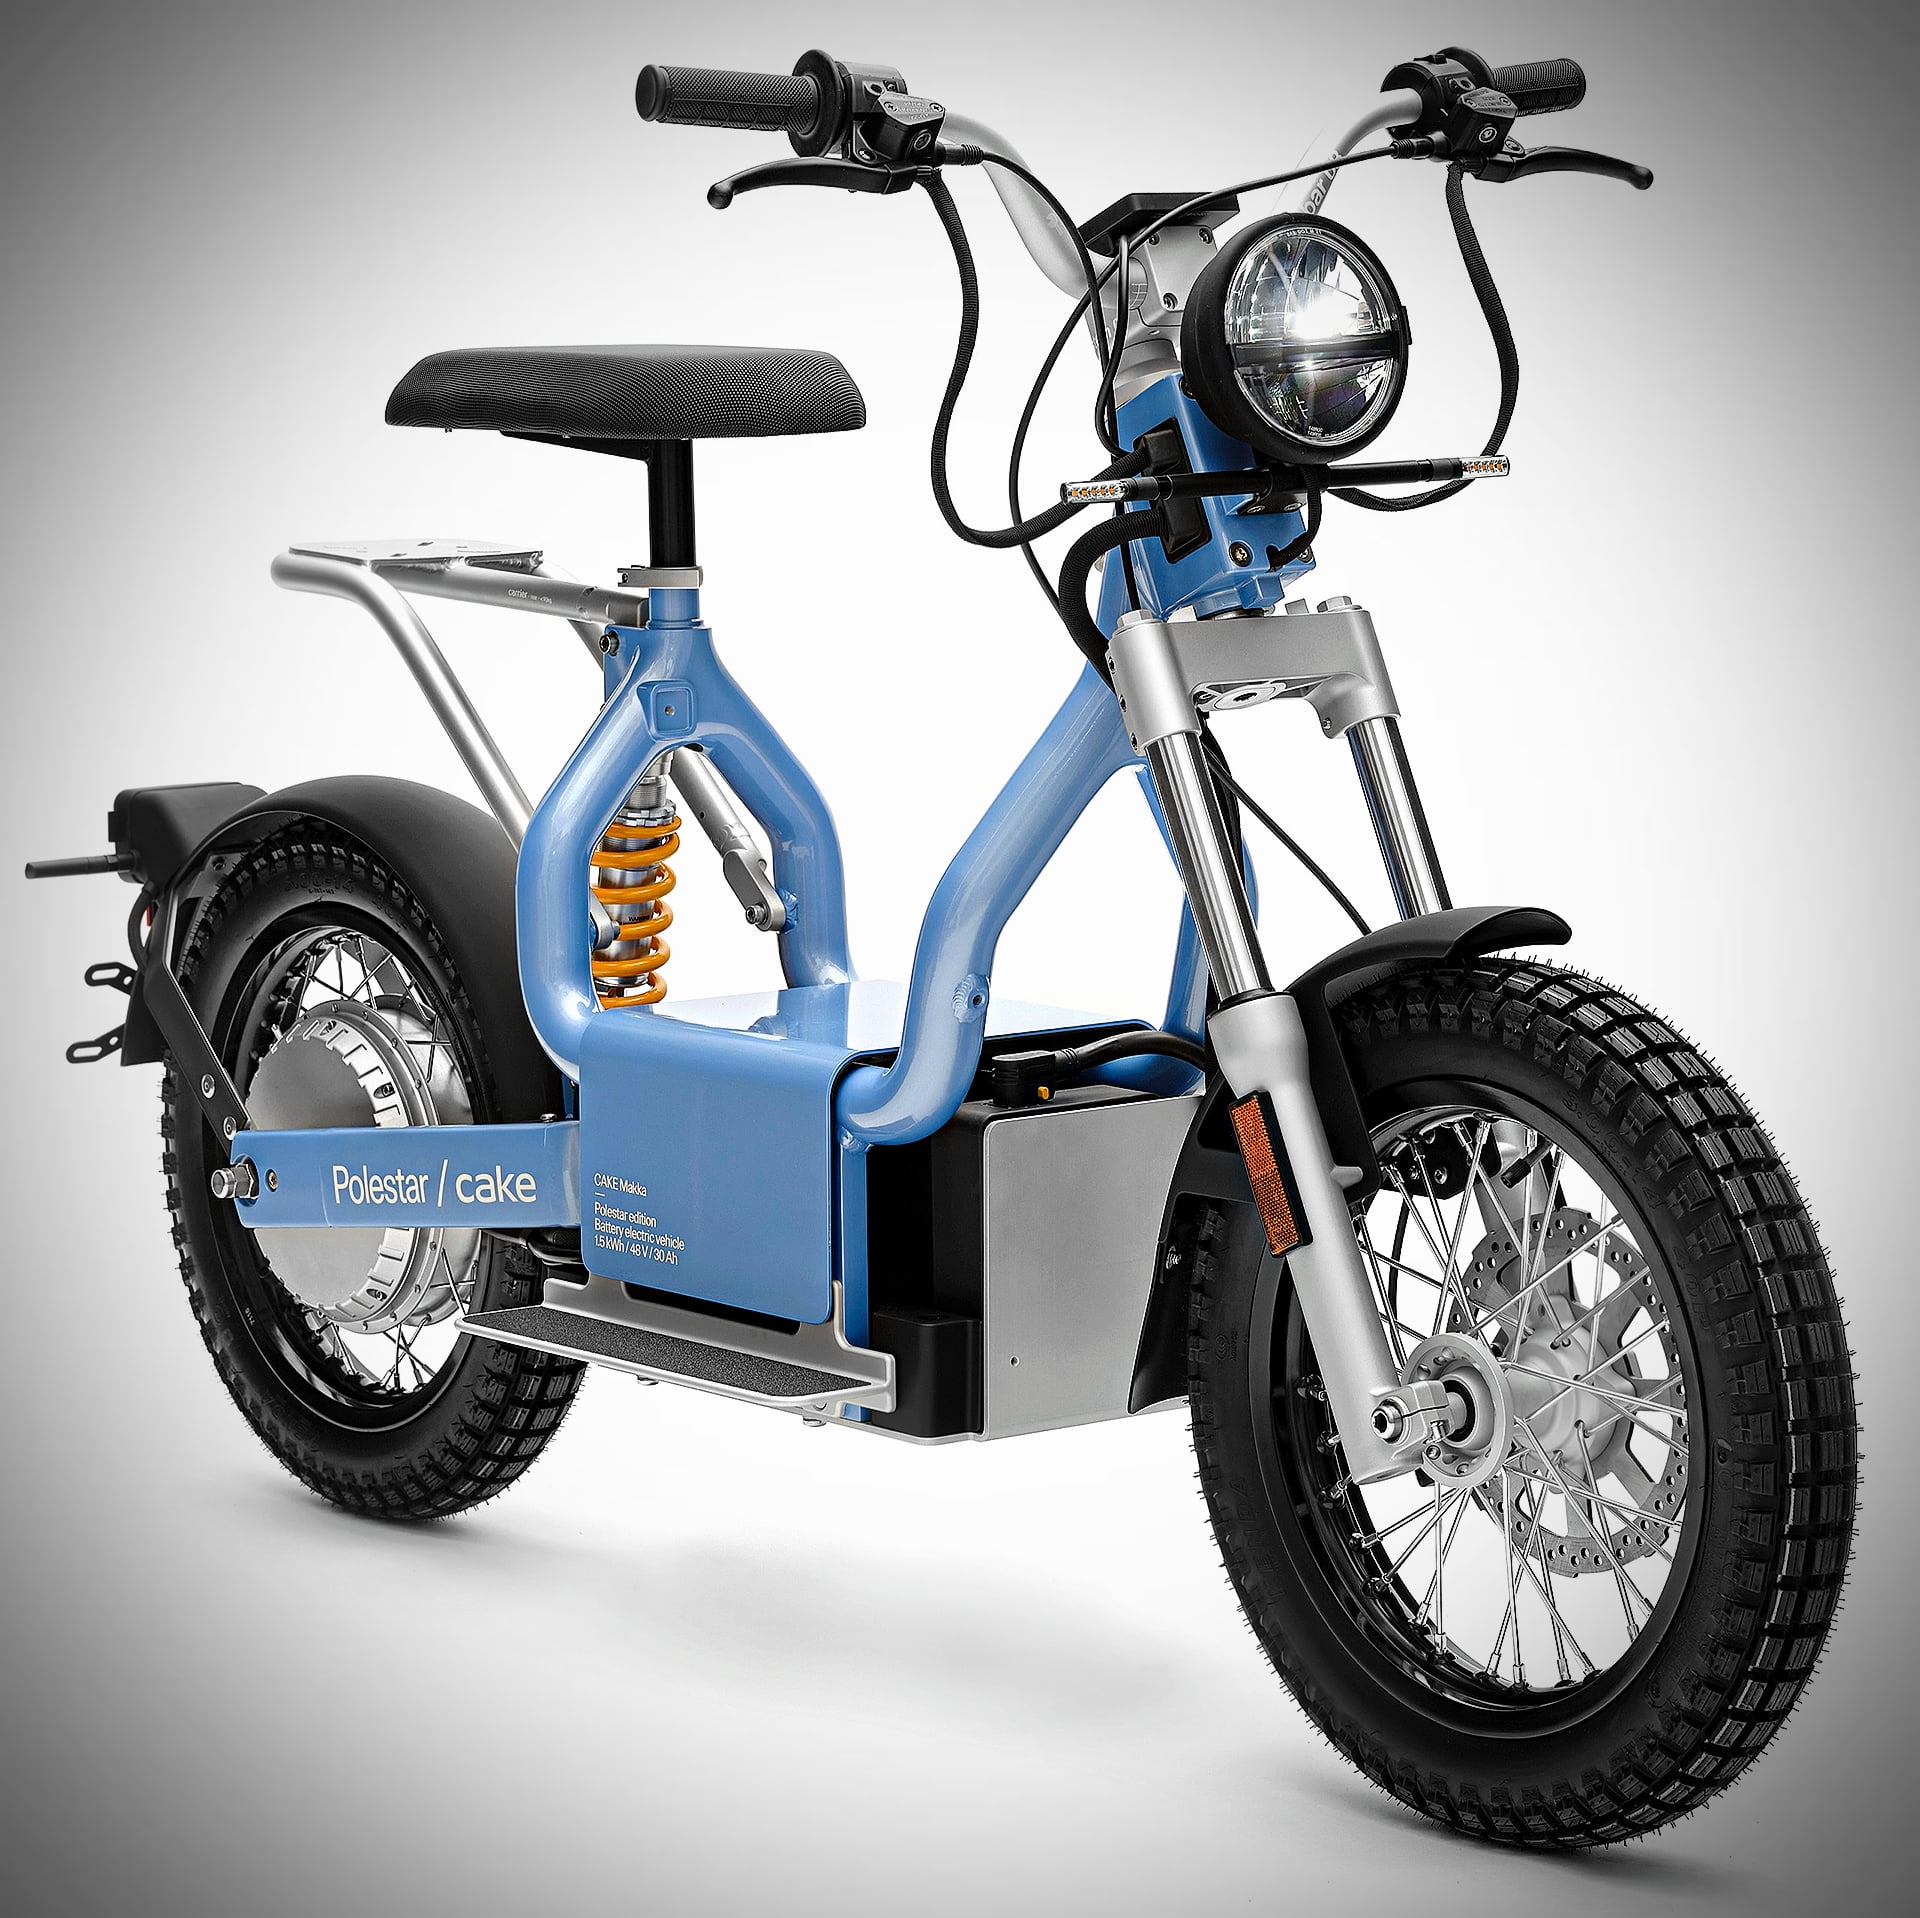 Polestar releases a new limited edition of CAKE Makka Electric Moped via 360 MAGAZINE. 